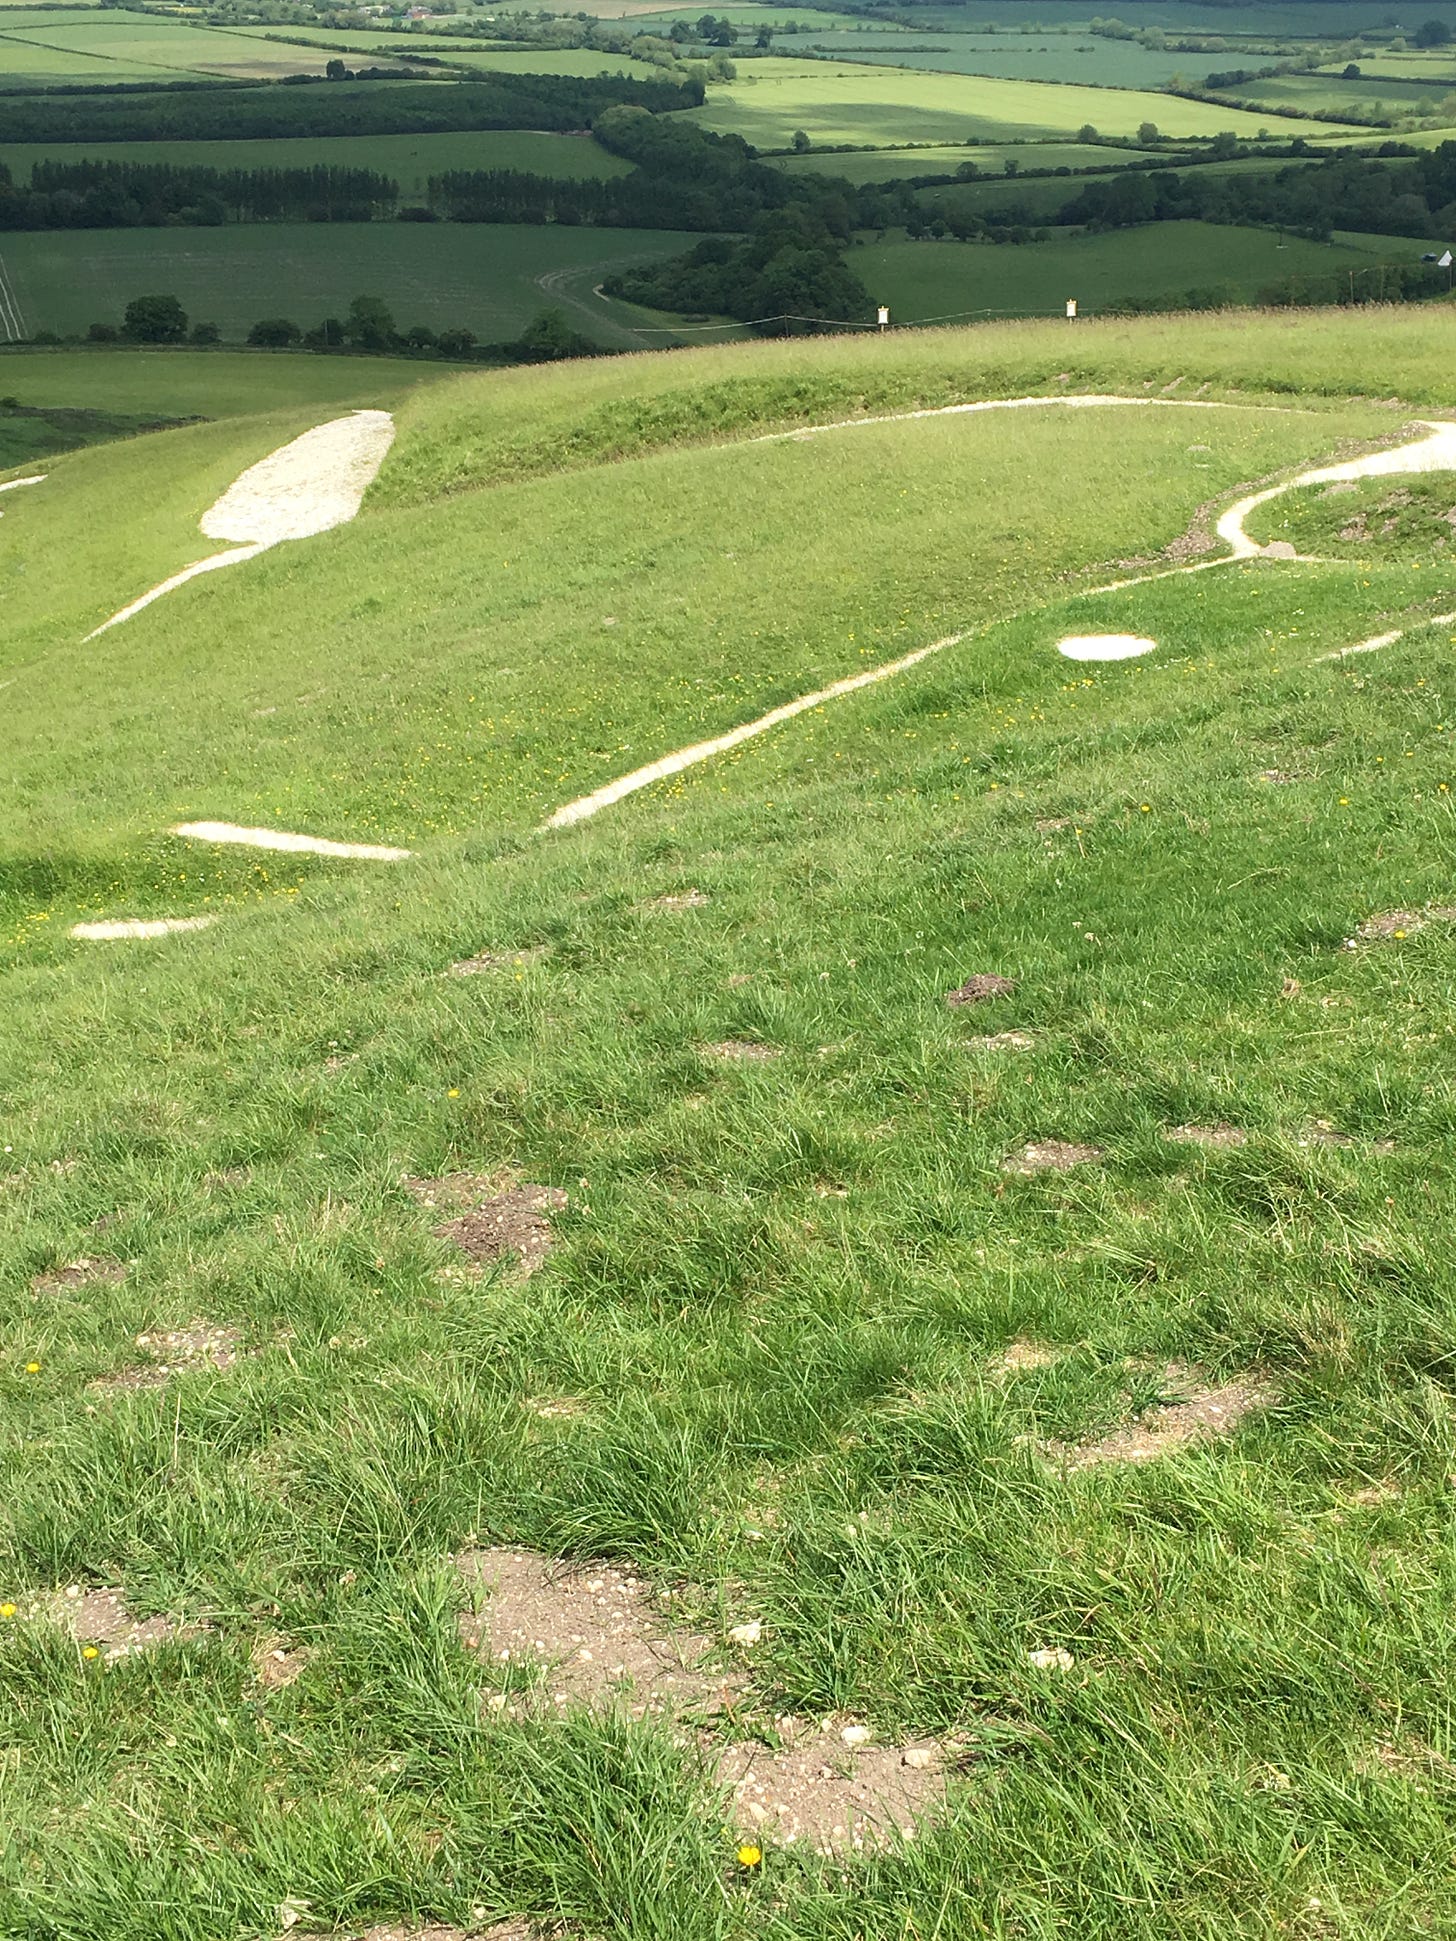 A grassy hilltop patterned with contours of white chalk, the head and forelock of a white-horse figure.